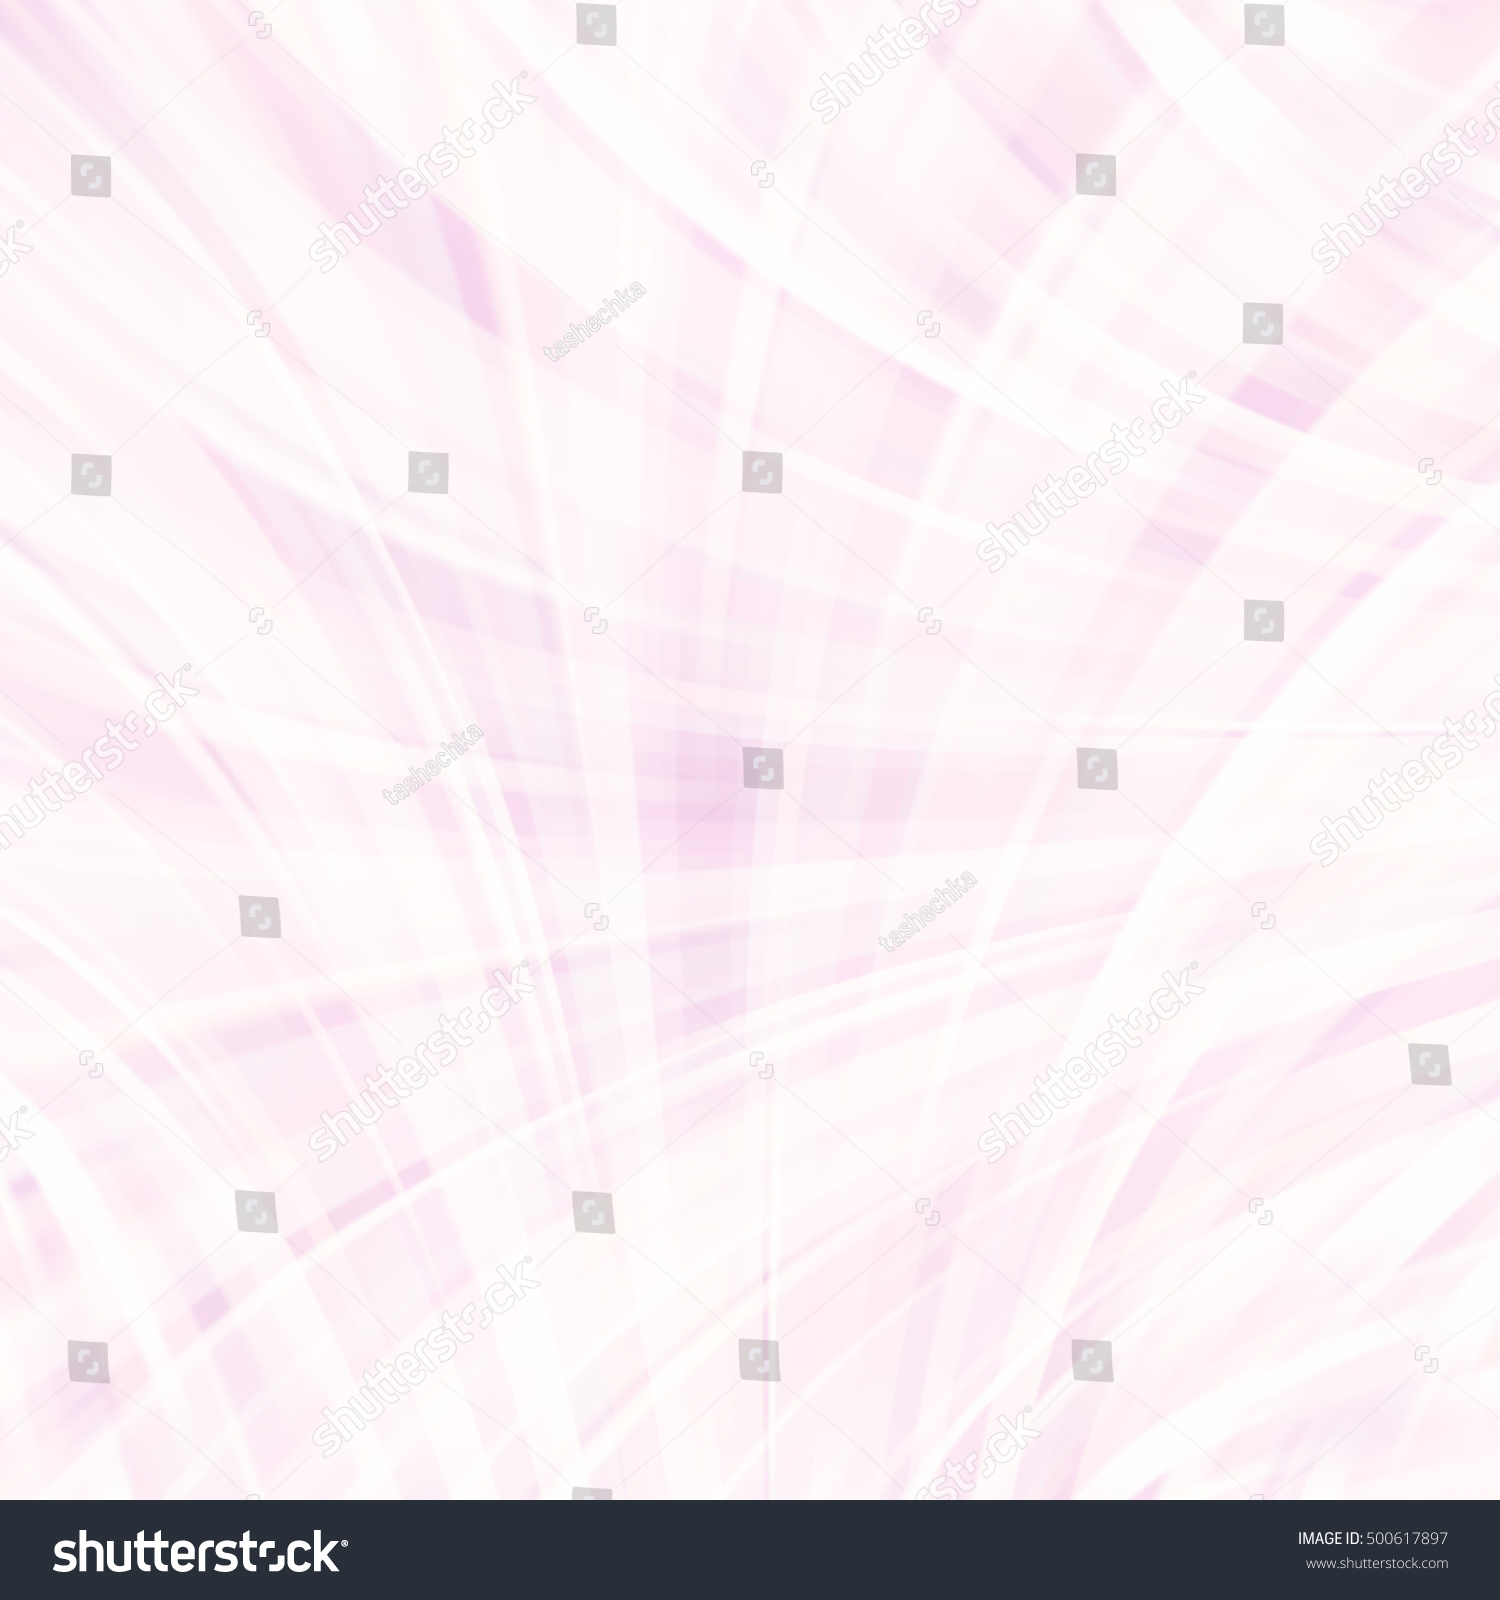 Vector illustration of pastel pink abstract background with blurred light curved lines. Vector geometric illustration. #500617897